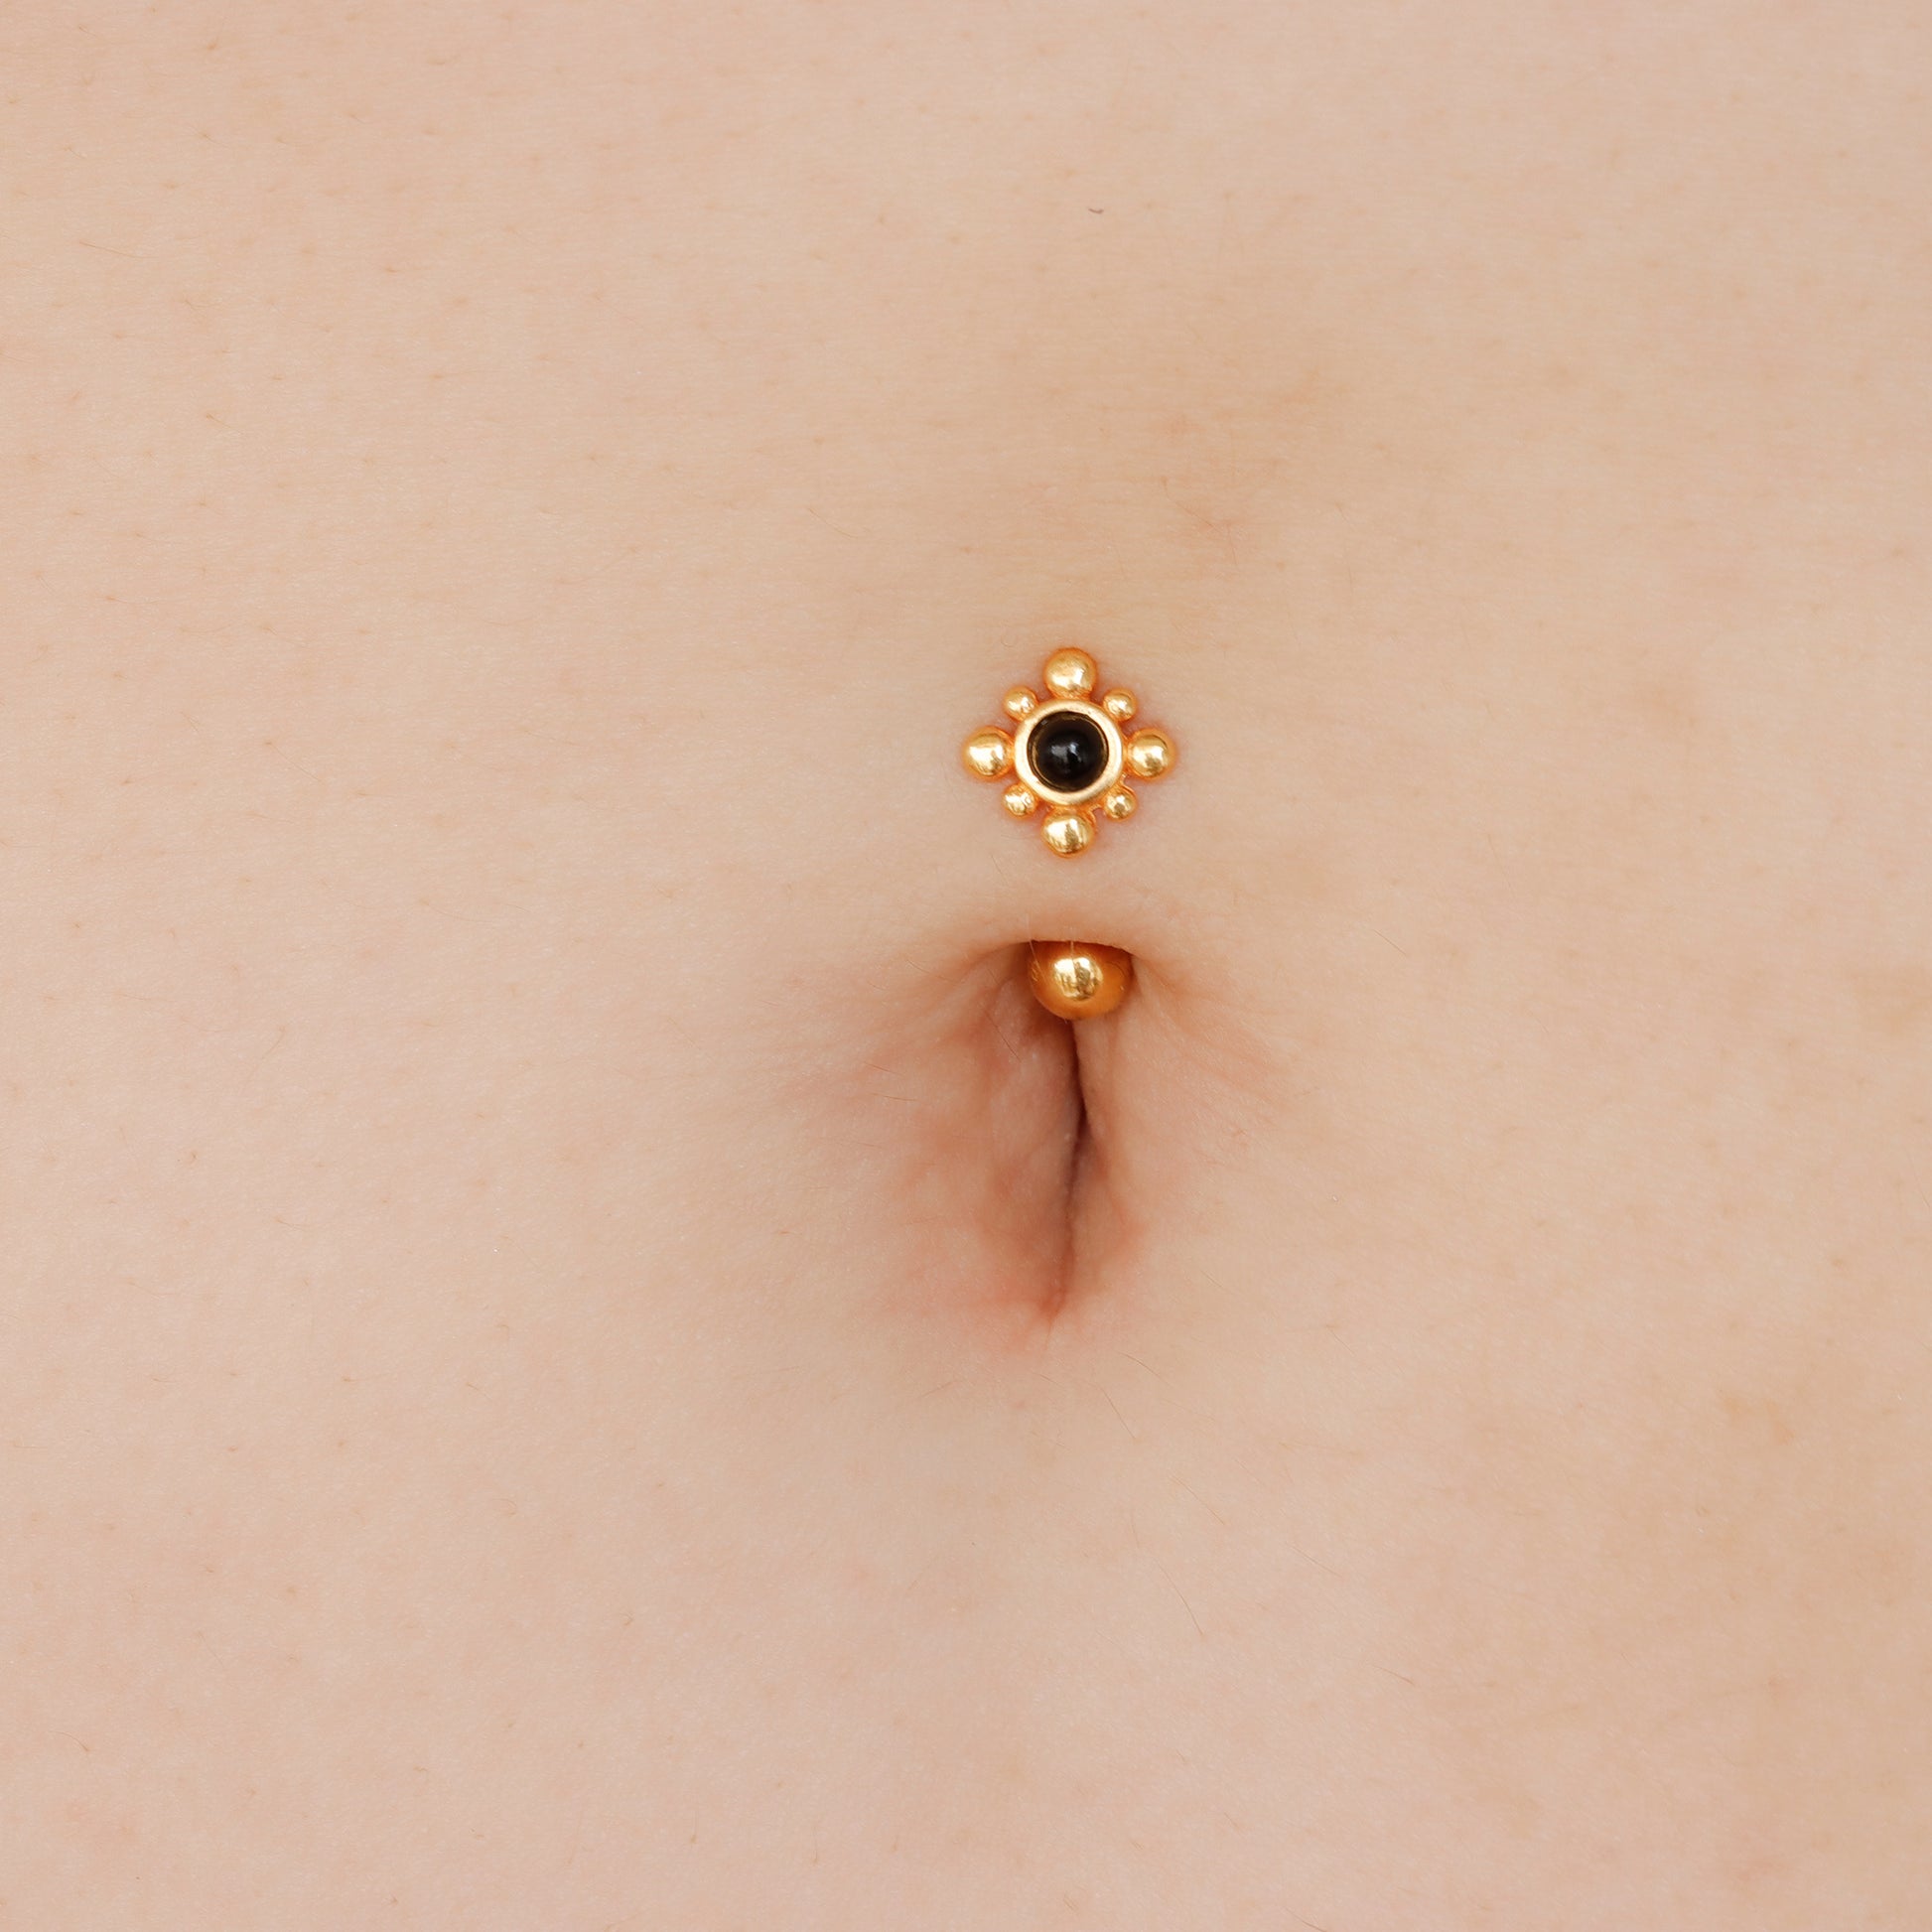 Vermeil | 925 Silver 24k Gold Coated 14G Black Petite Sun Reverse Belly Ring | 6mm 1/4" 8mm 5/16" 10mm 3/8" - Sturdy South